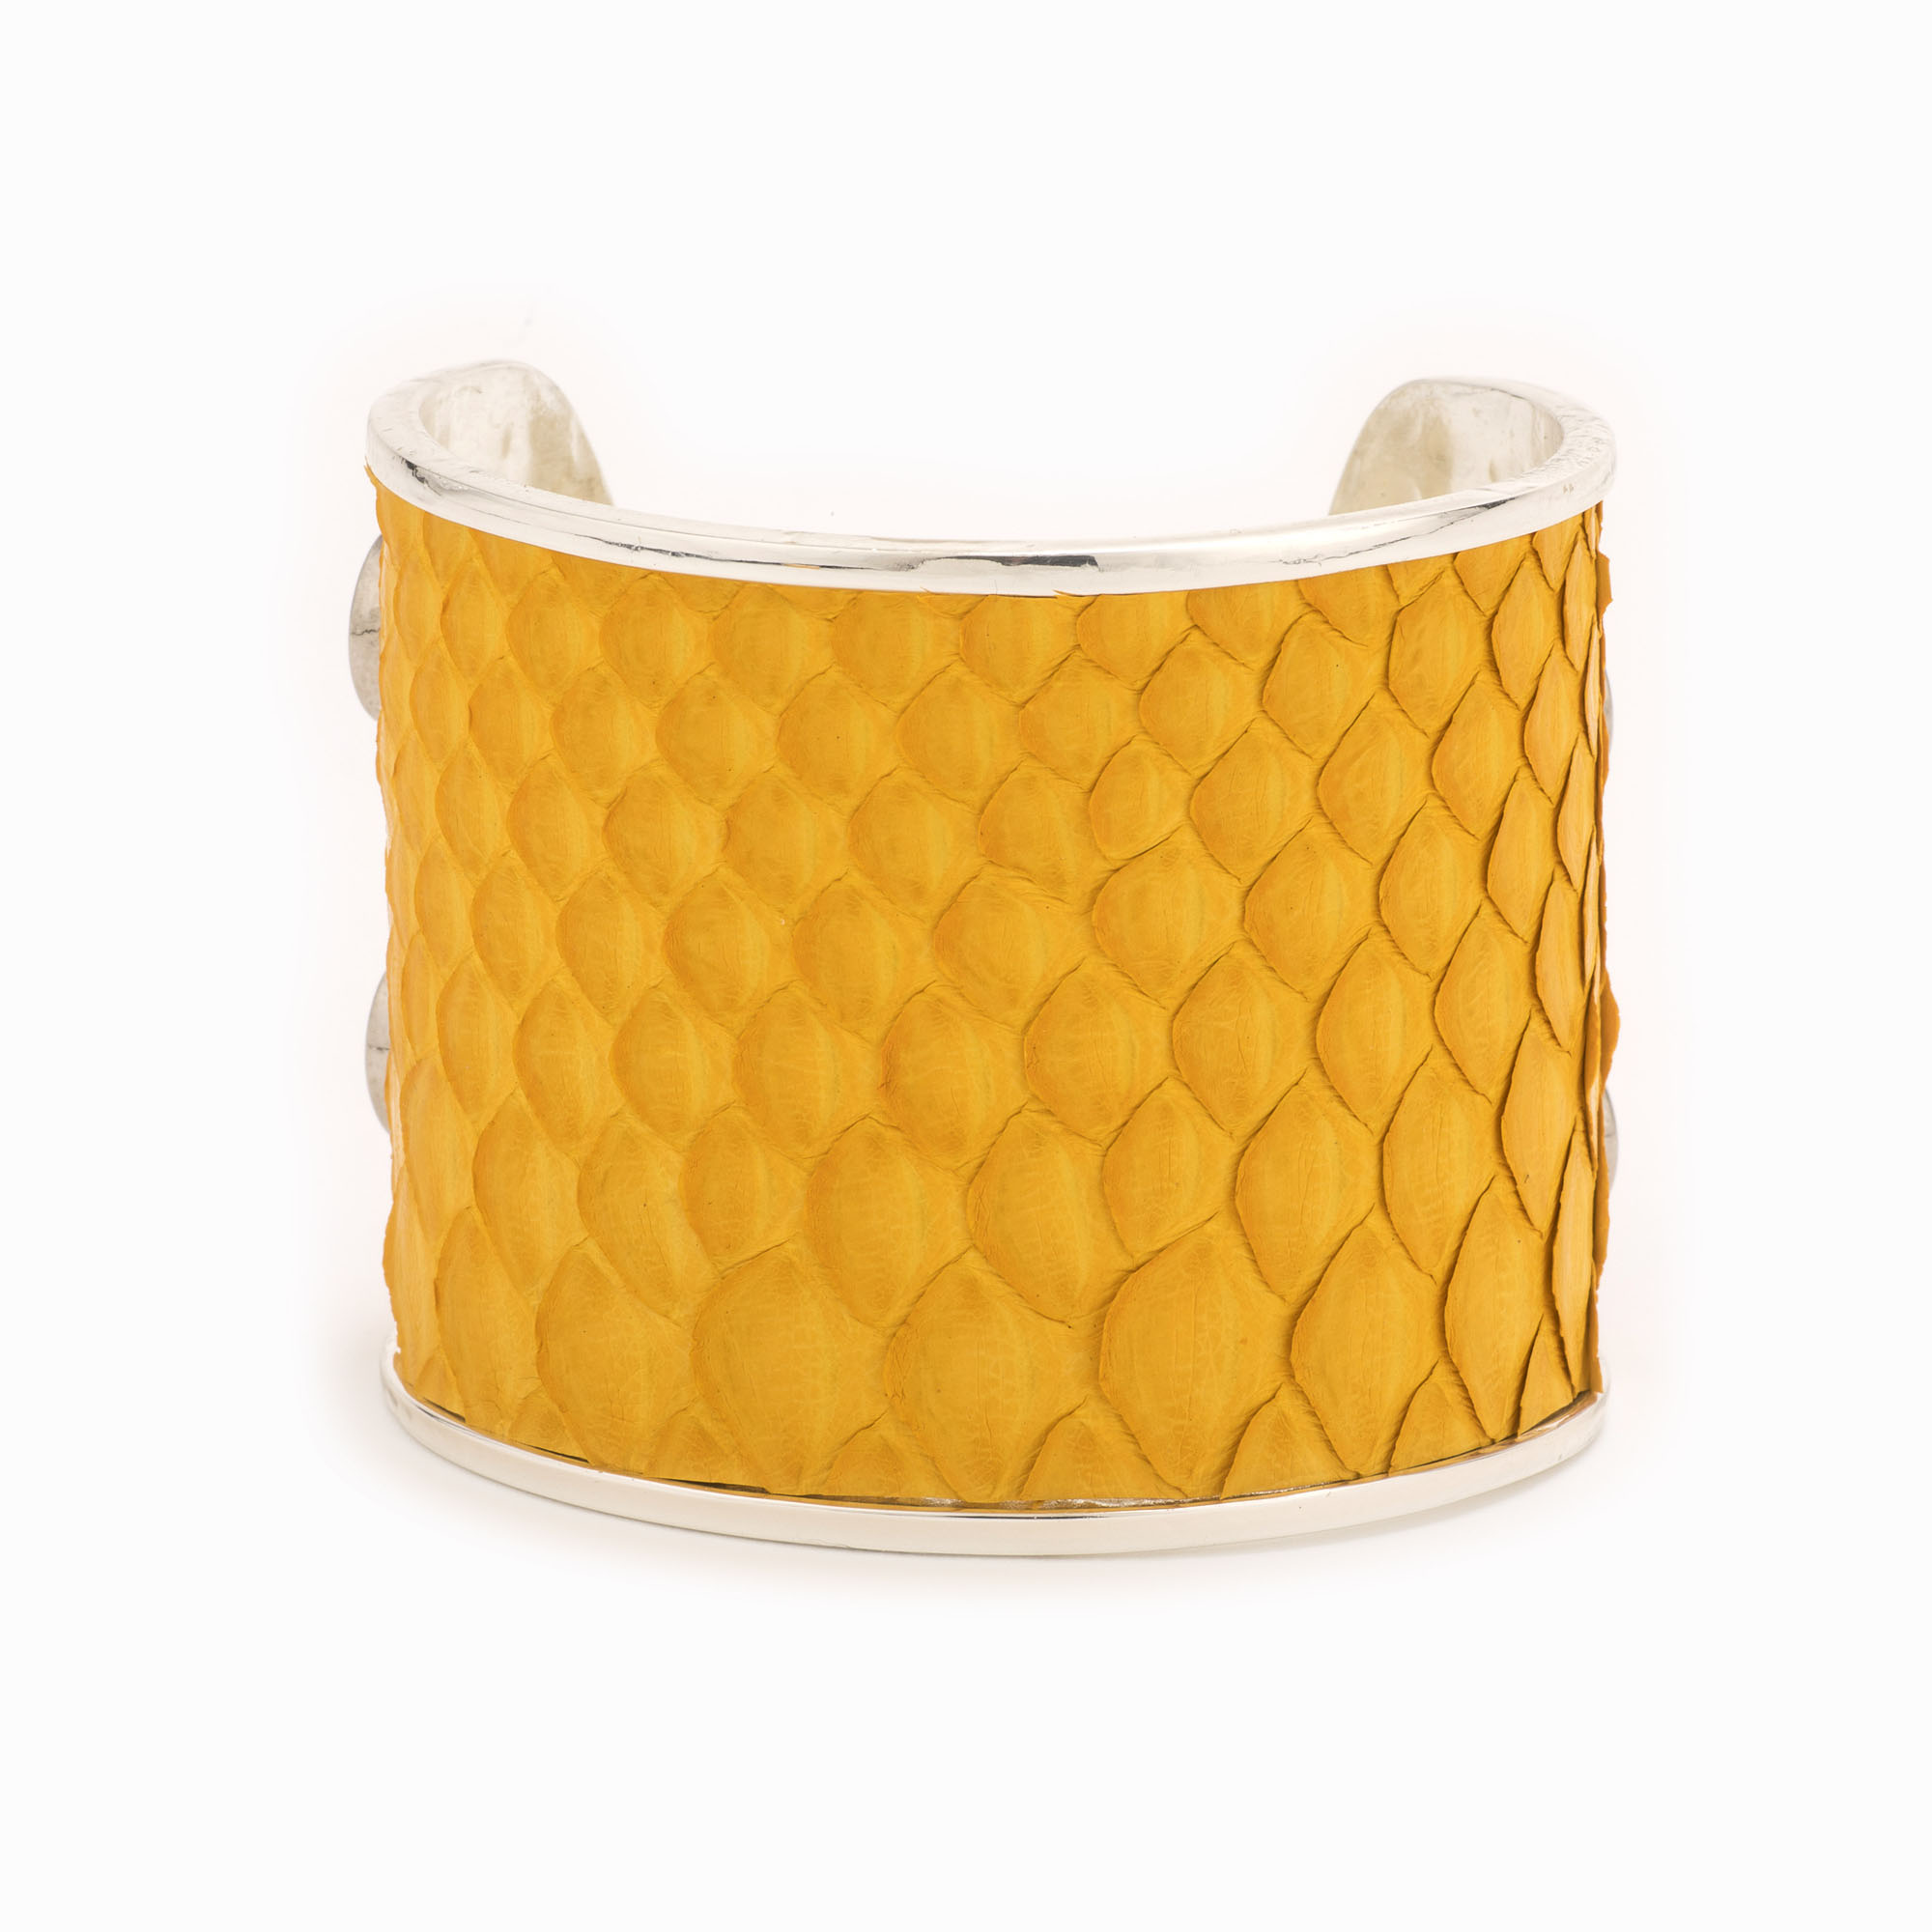 Featured image for “Large Mustard Silver Cuff”